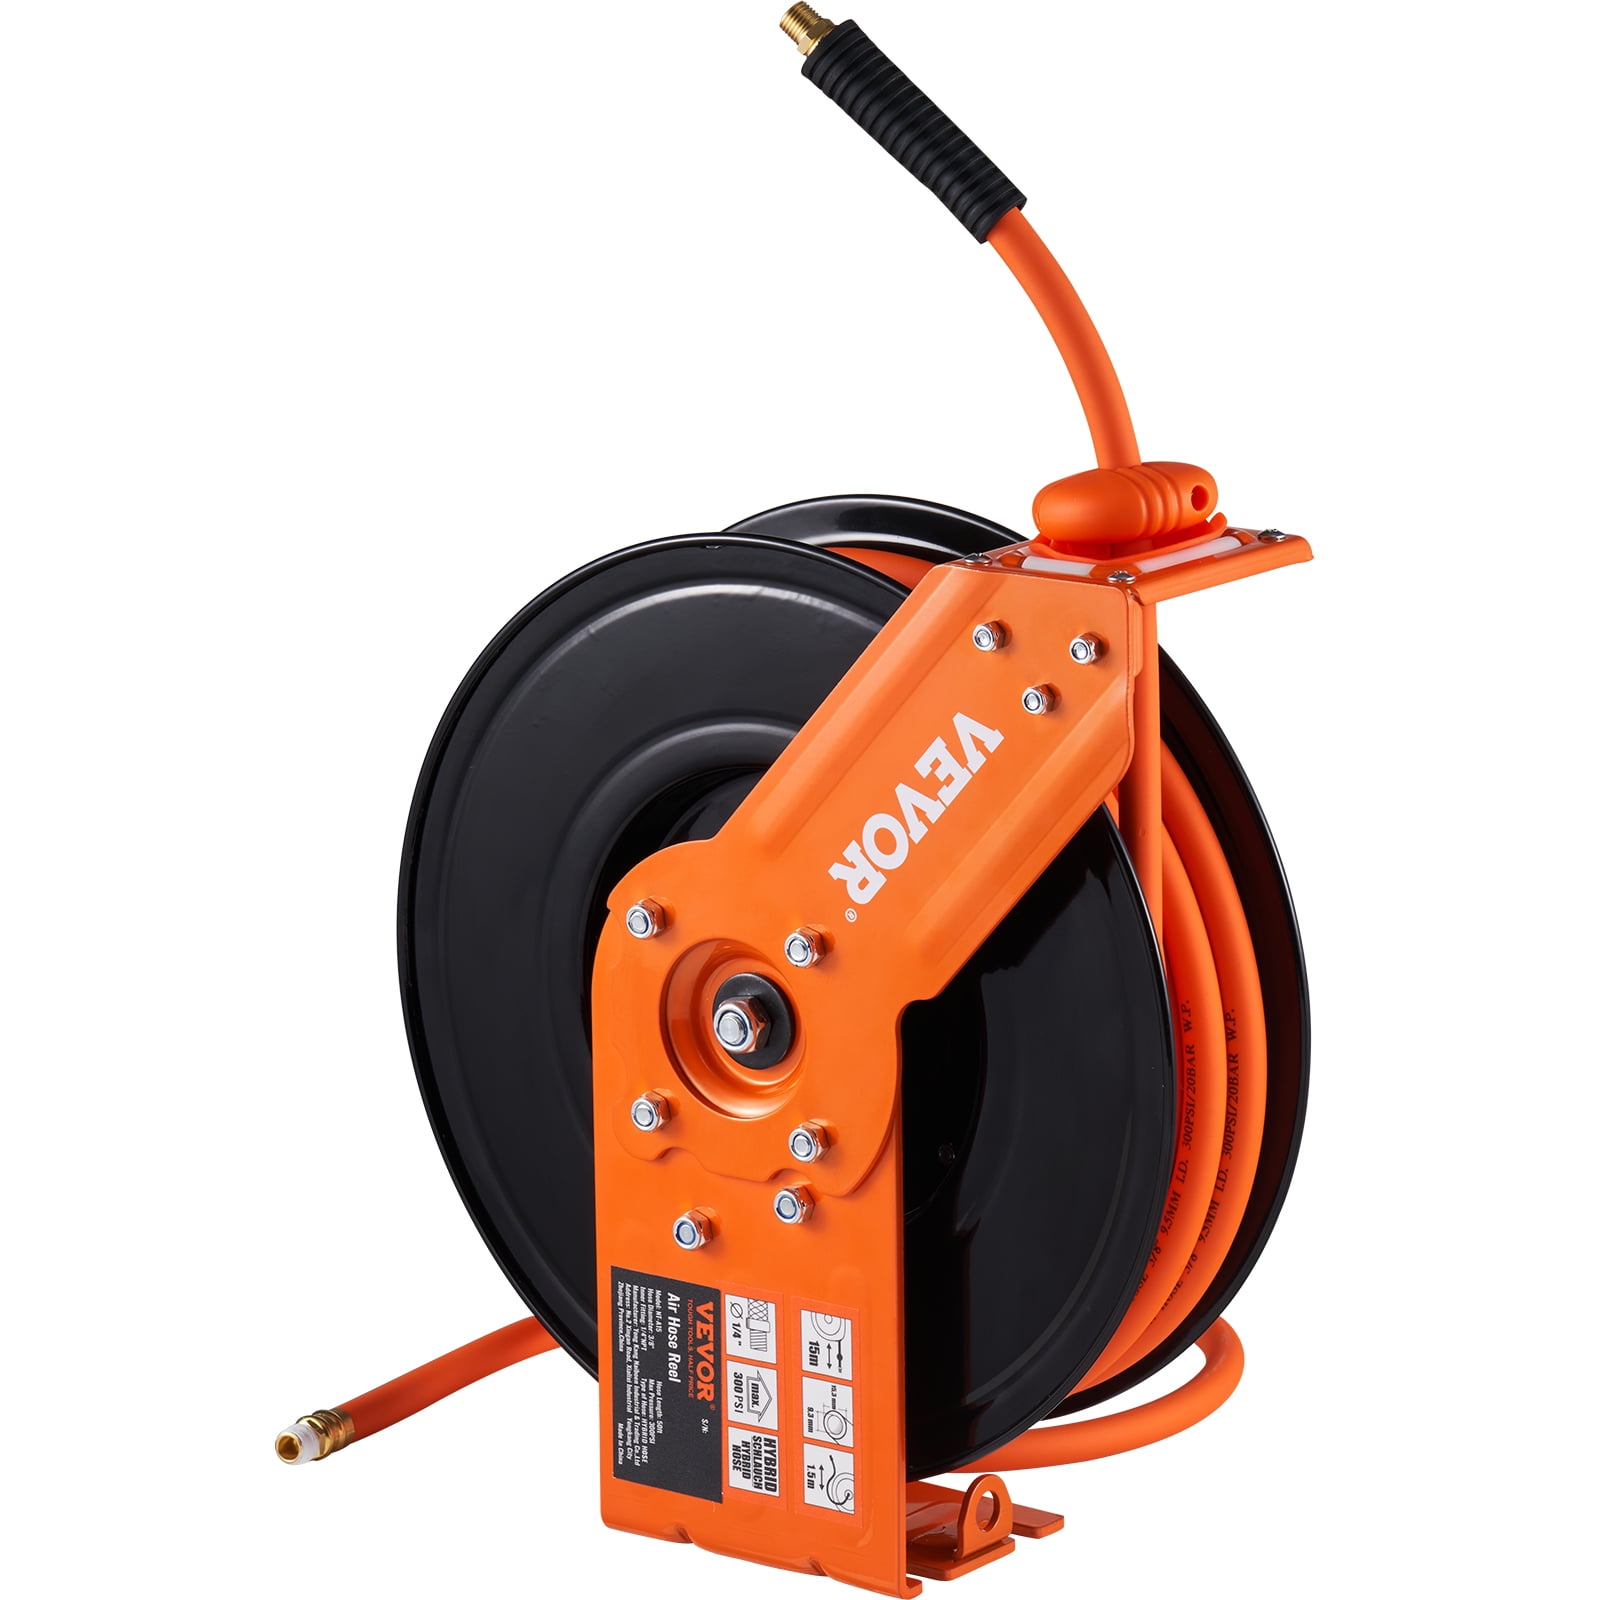 Air Hose Reel Retractable 3/8 in. x 50 ft Hybrid Polymer Hose, Retractable  Auto-Rewind Enclosed Heavy Duty 180° Swivel Mount, Max 300PSI Commerical  Polypropylene 